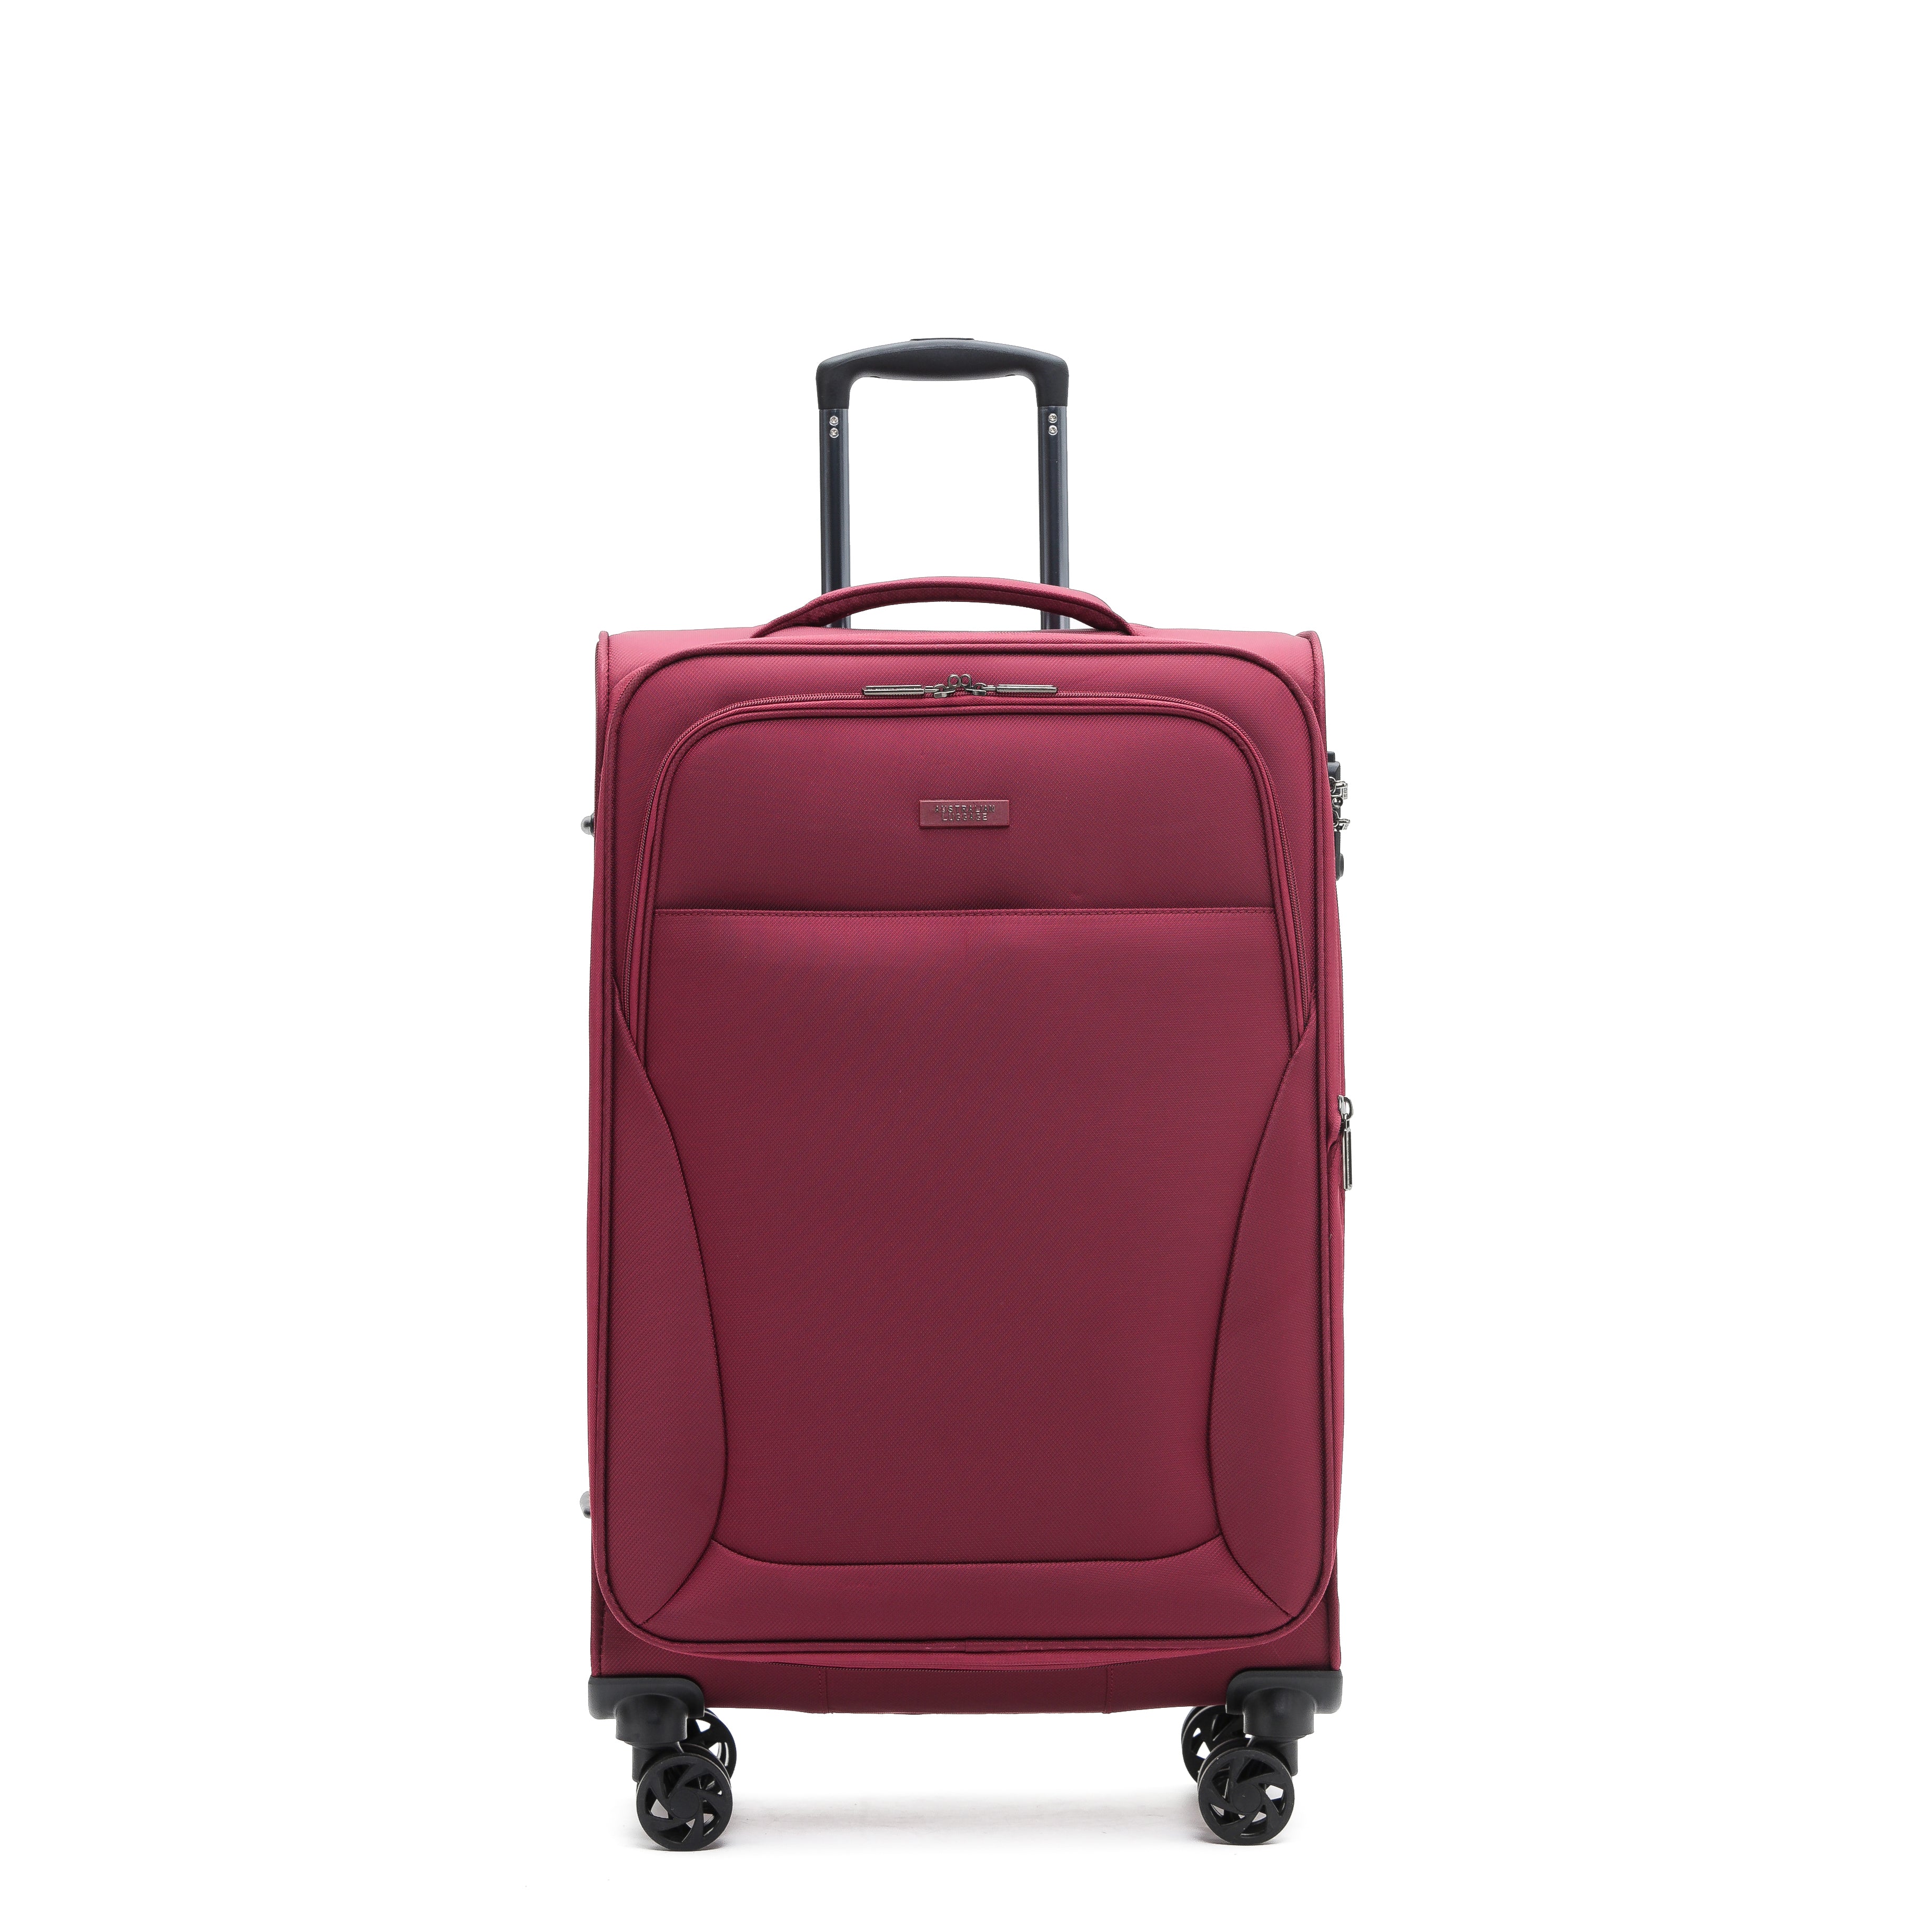 AUS LUGGAGE - WINGS Trolley Case 29in Large - Wine *DC